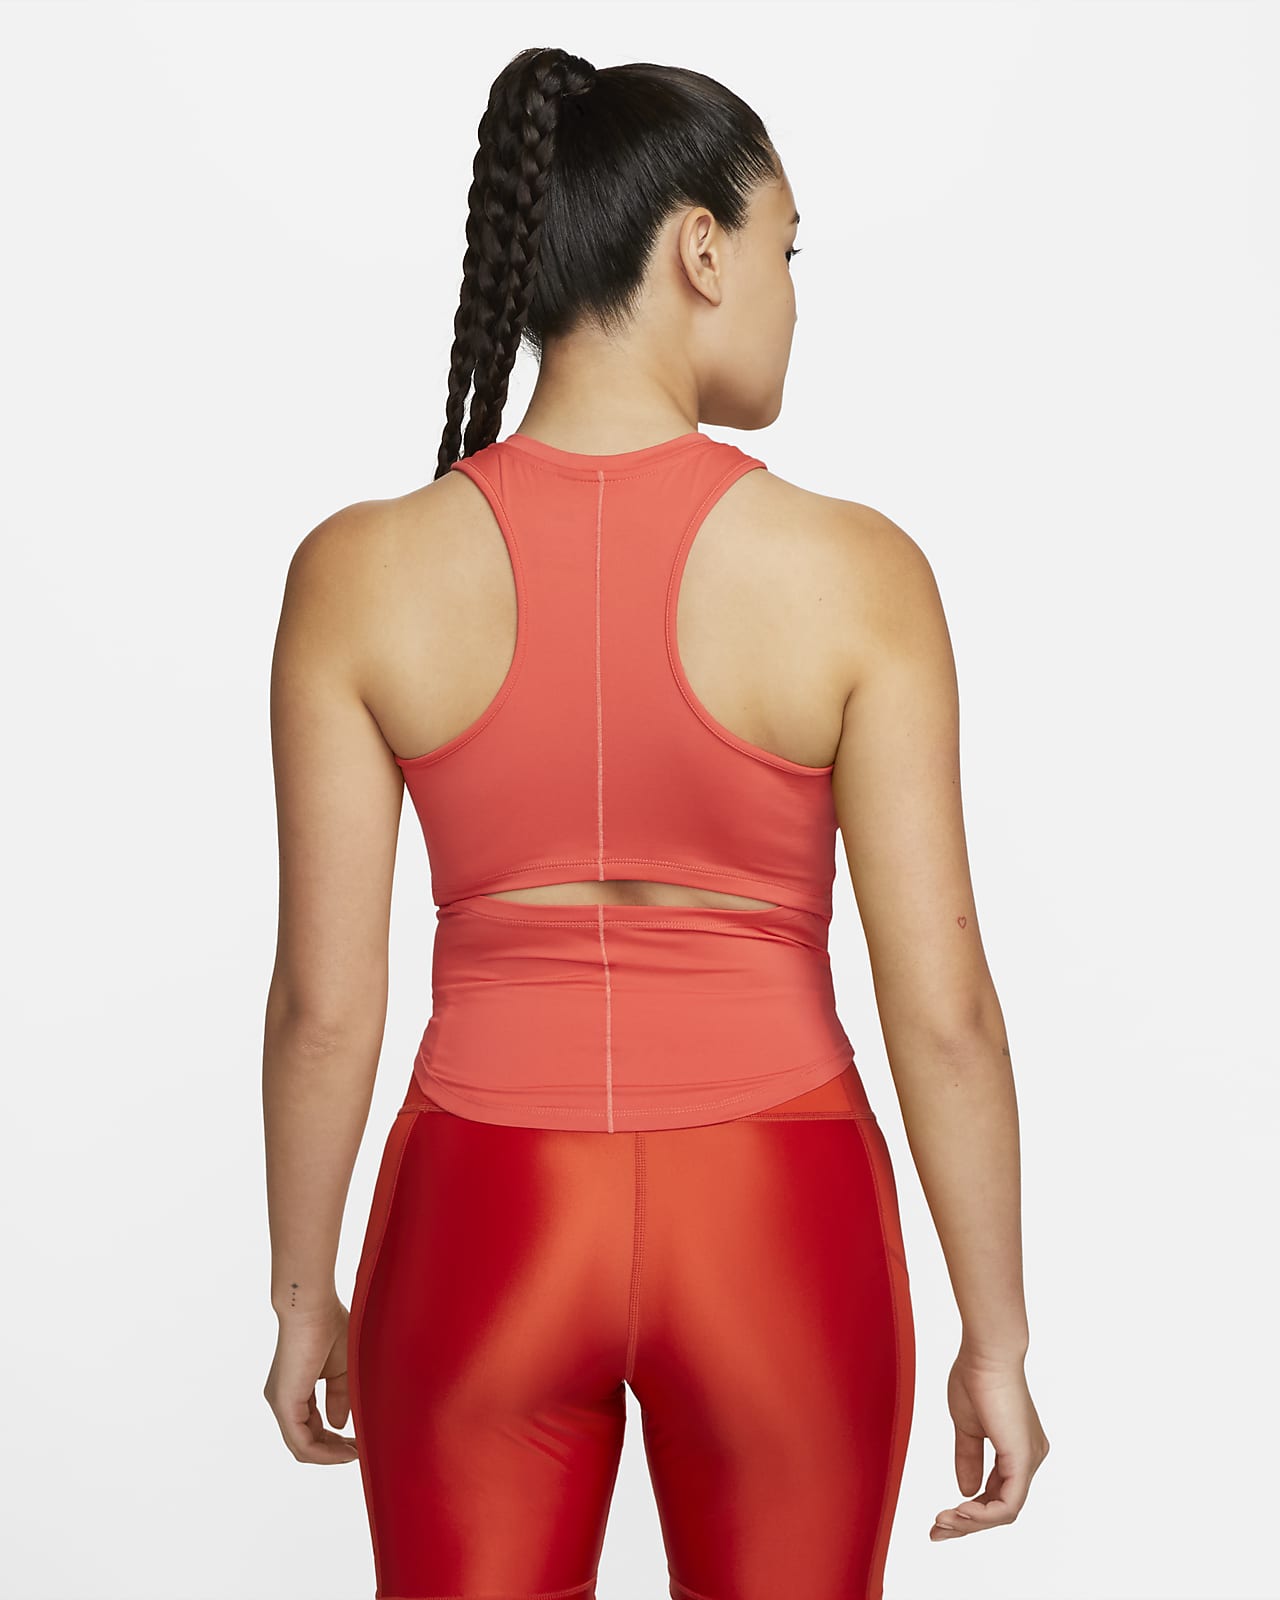 WOMEN'S NIKE DRI FIT ONE LUXE TIGHTS - NIKE - Women's - Clothing